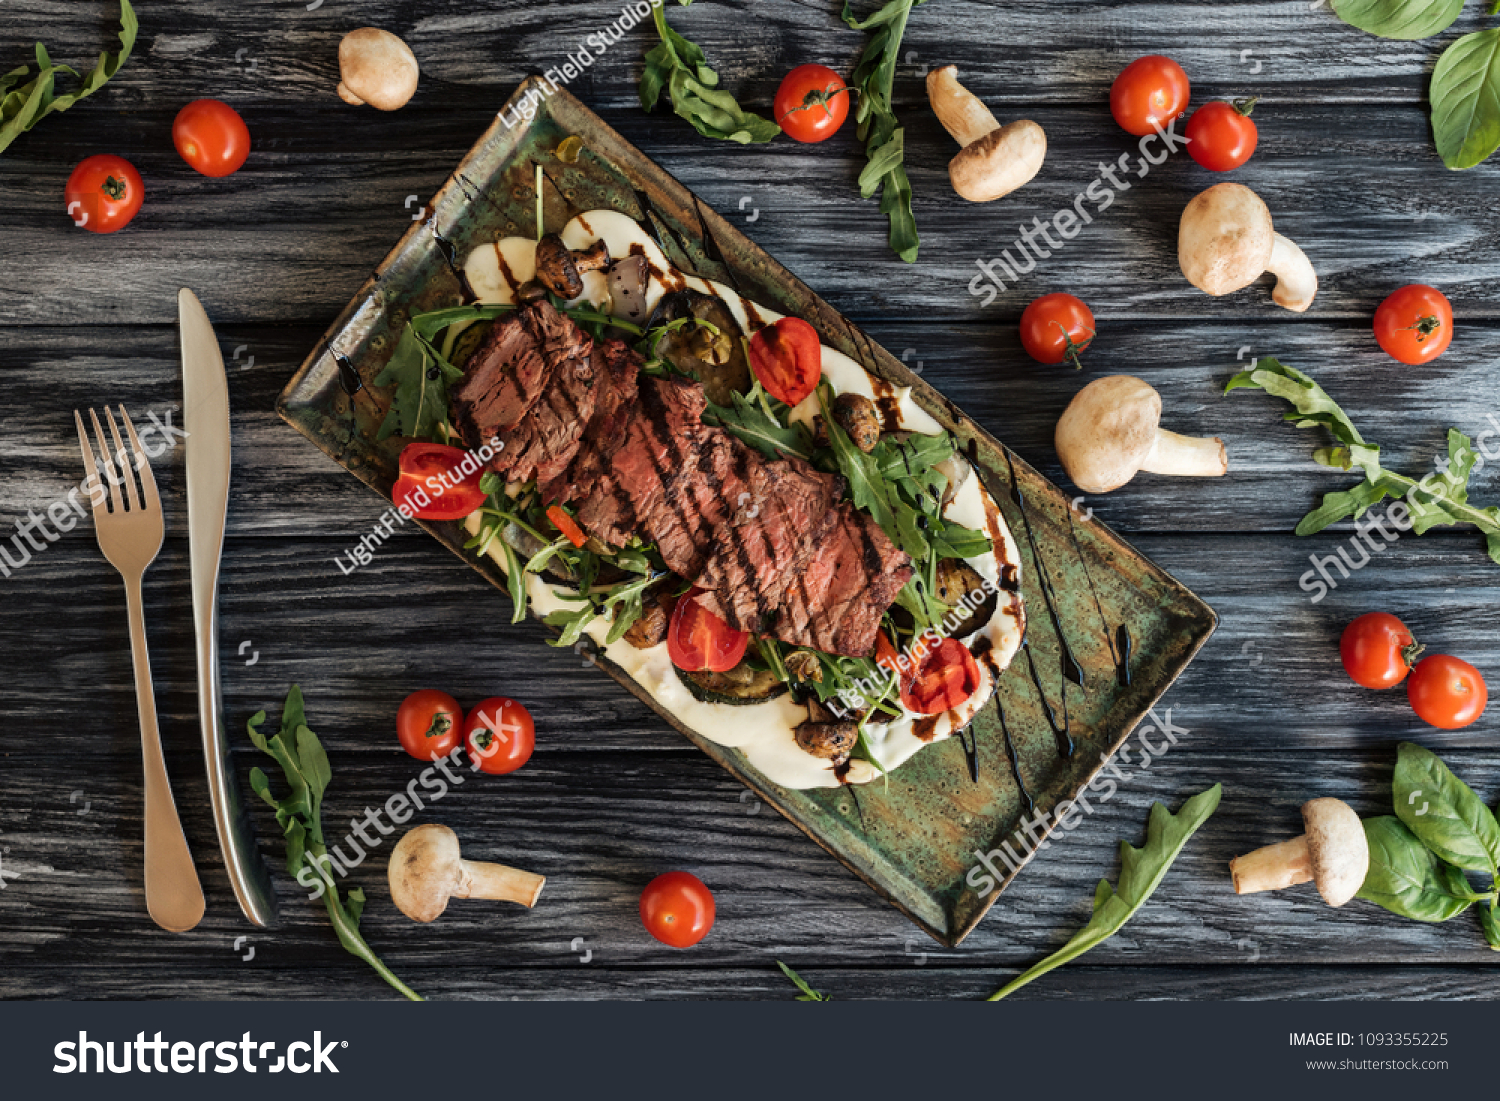 top view of delicious roasted steak, fork with knife and vegetables on wooden table  #1093355225